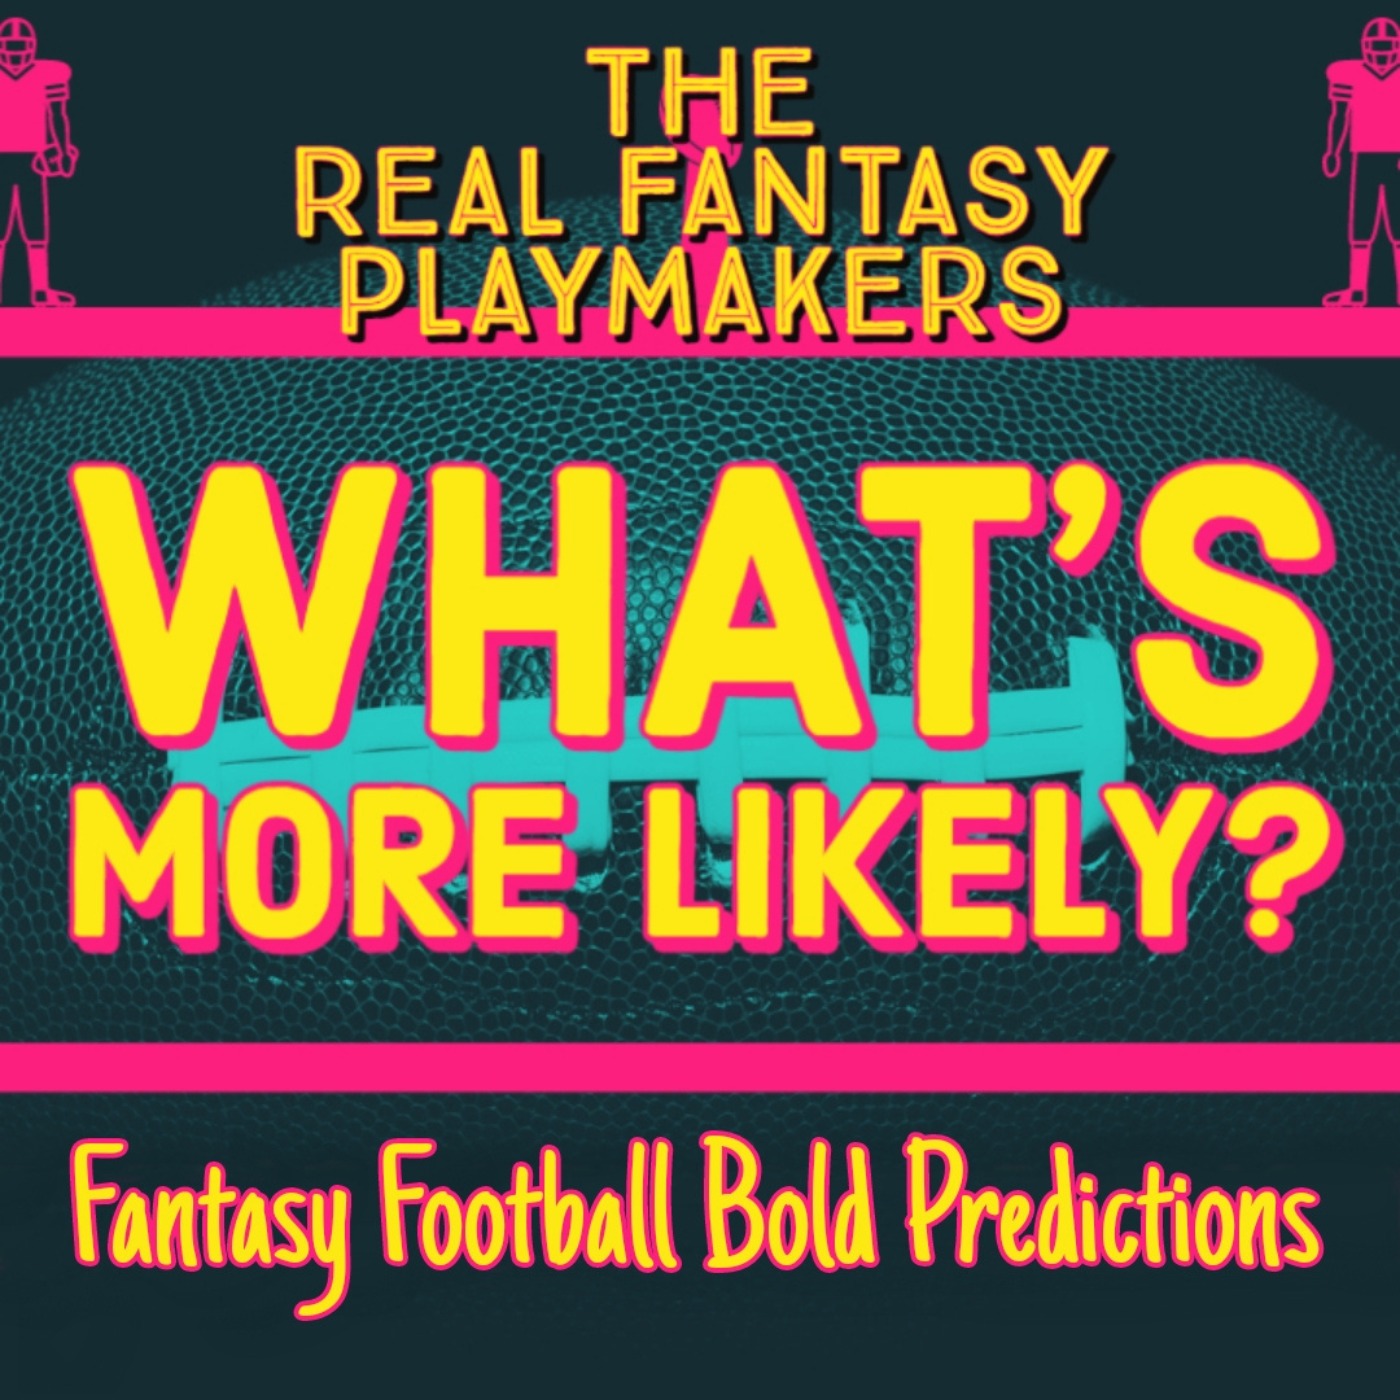 Fantasy Football What's More Likely? Image